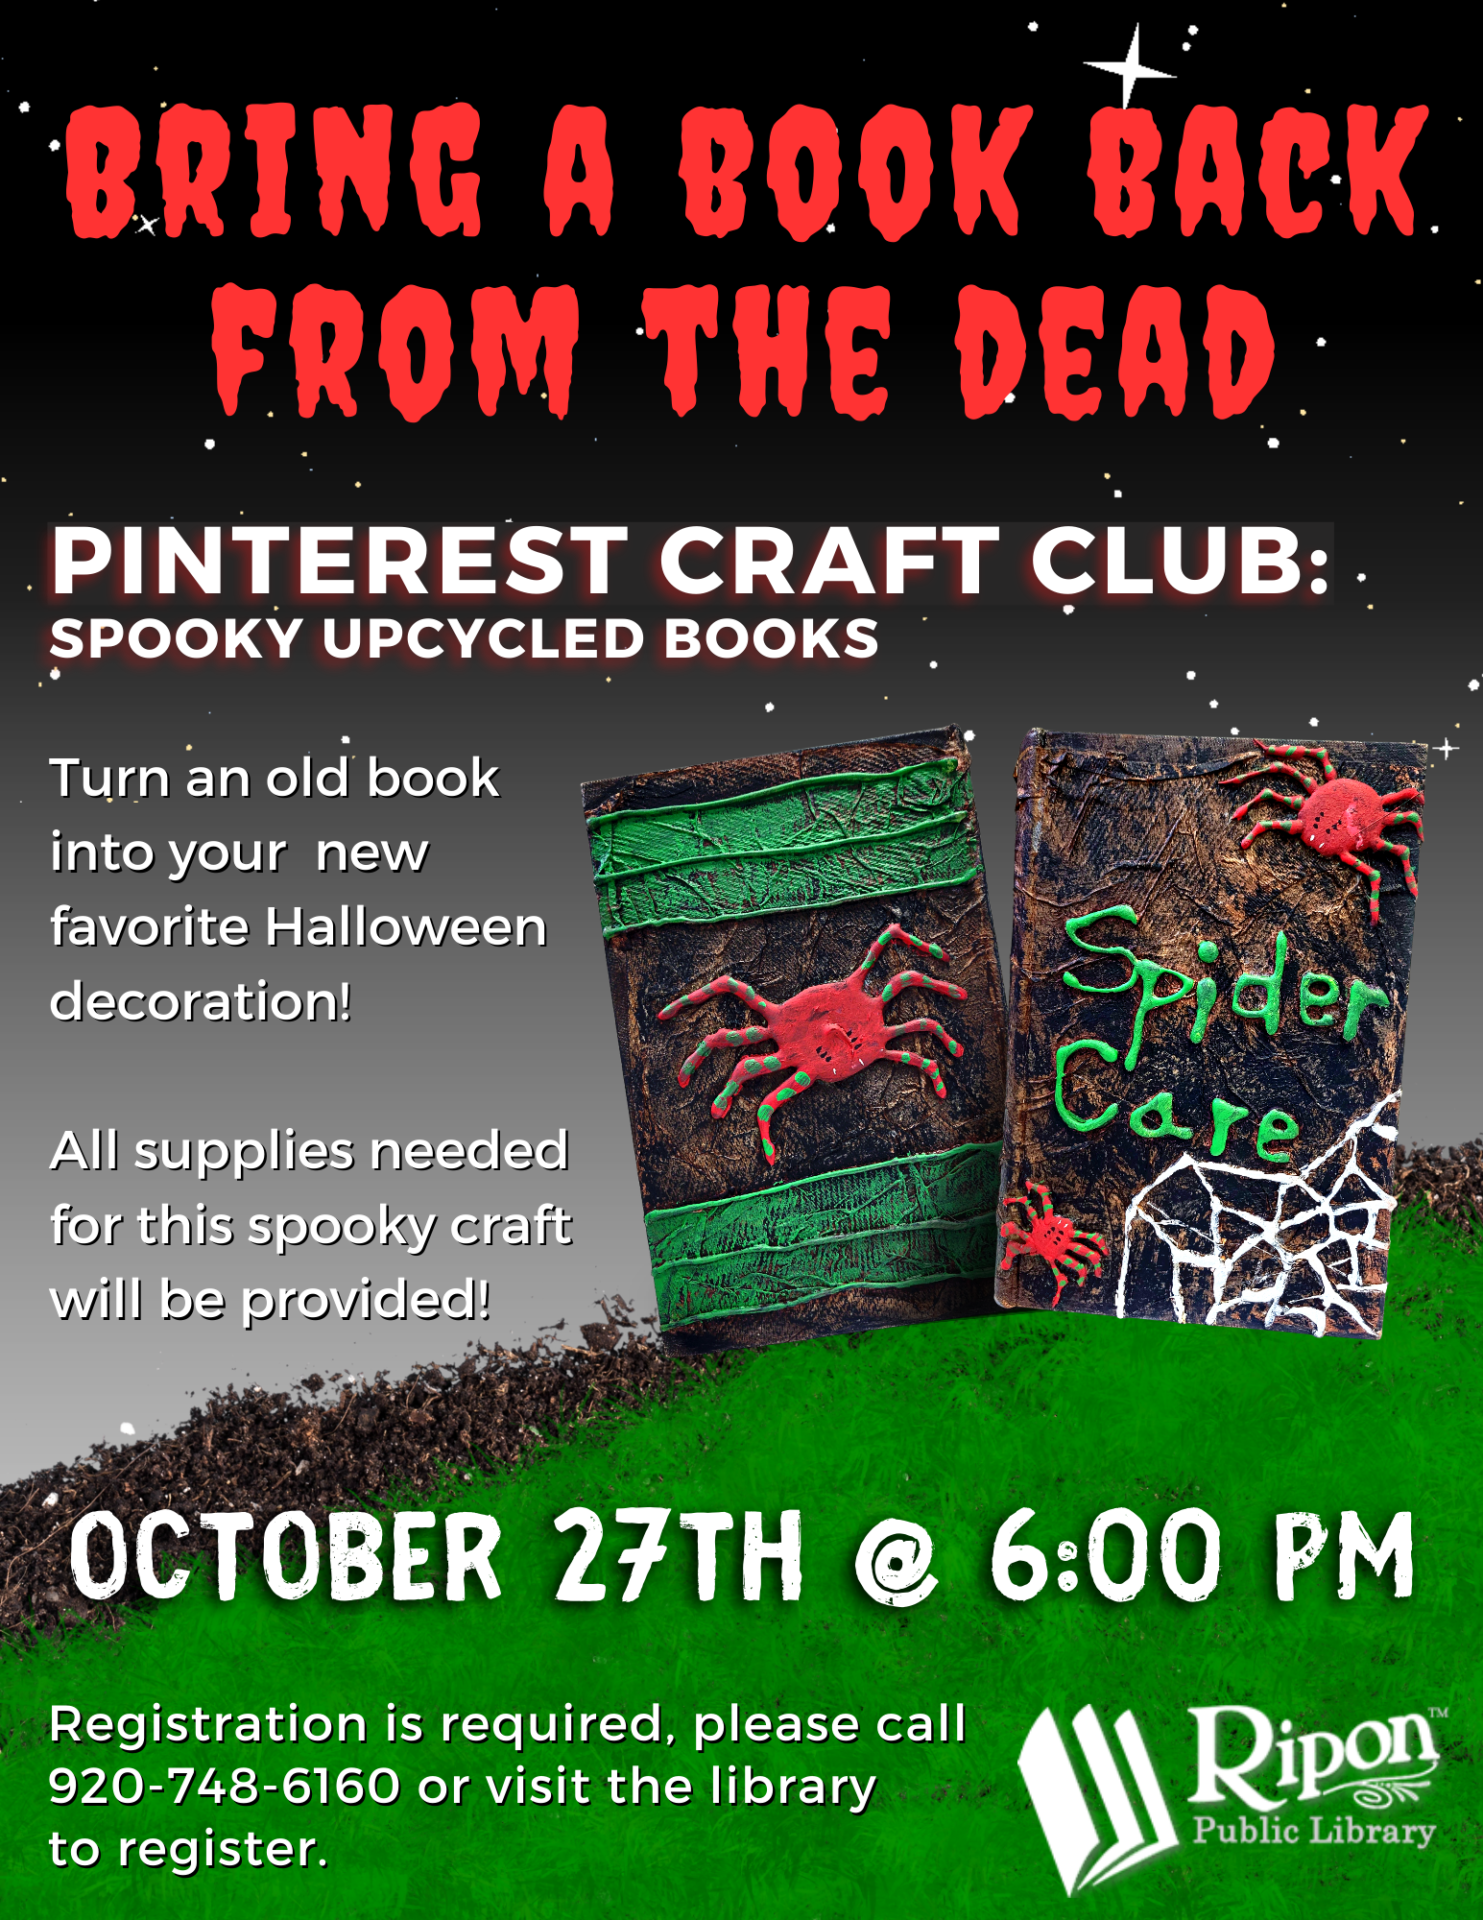 Pinterest Craft Club: Spooky Upcycled Books